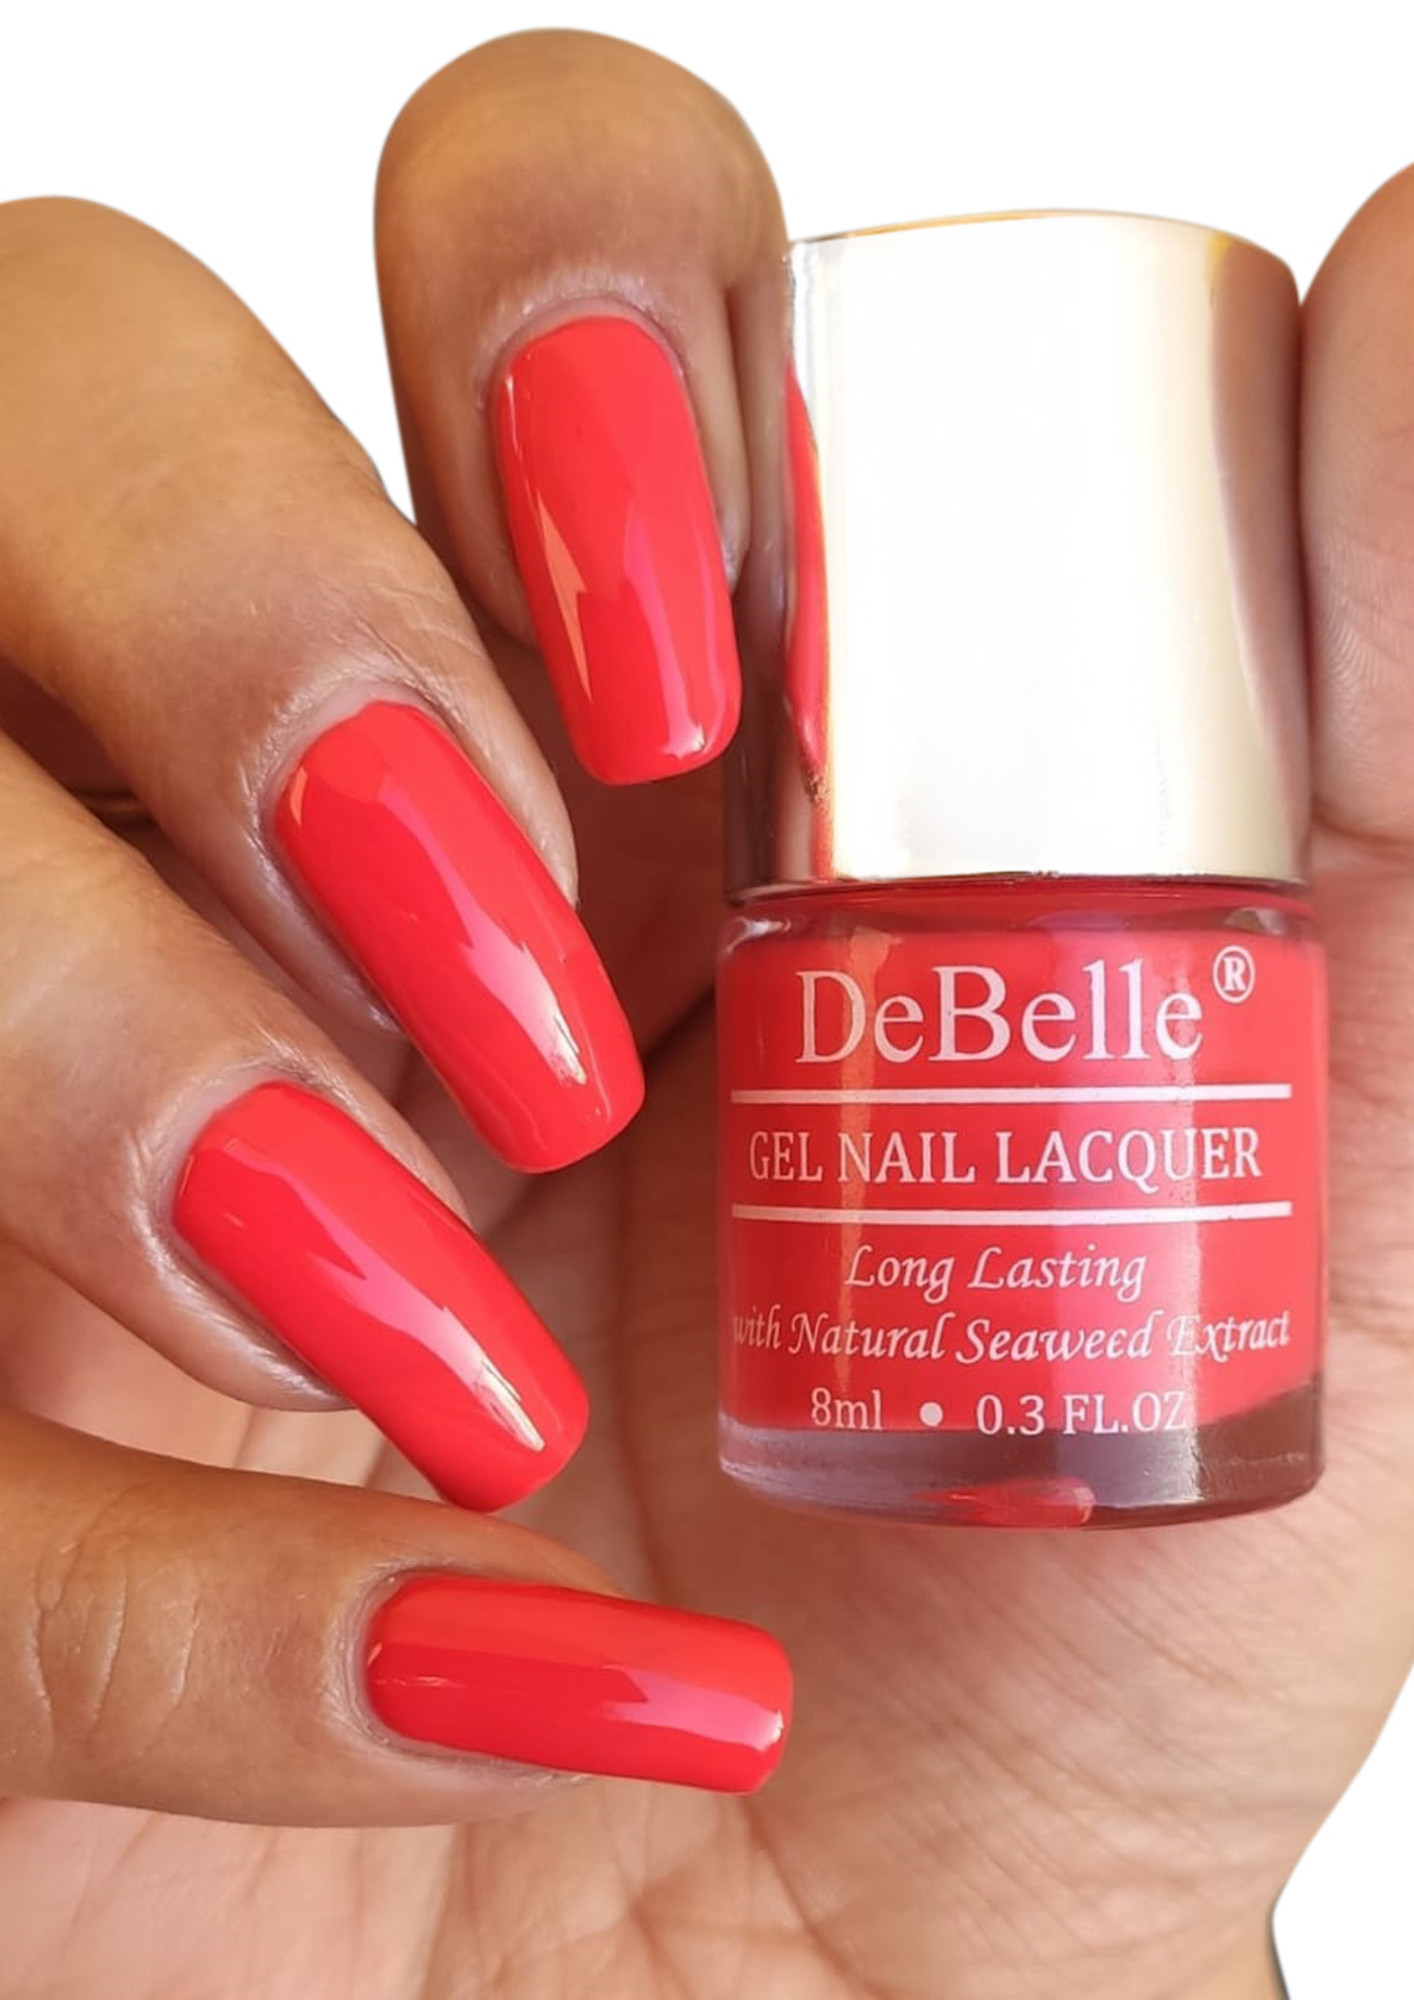 DeBelle Gel Nail Lacquer Dusty Orange Nail Polish- Apricot Brulee - Price  in India, Buy DeBelle Gel Nail Lacquer Dusty Orange Nail Polish- Apricot  Brulee Online In India, Reviews, Ratings & Features |